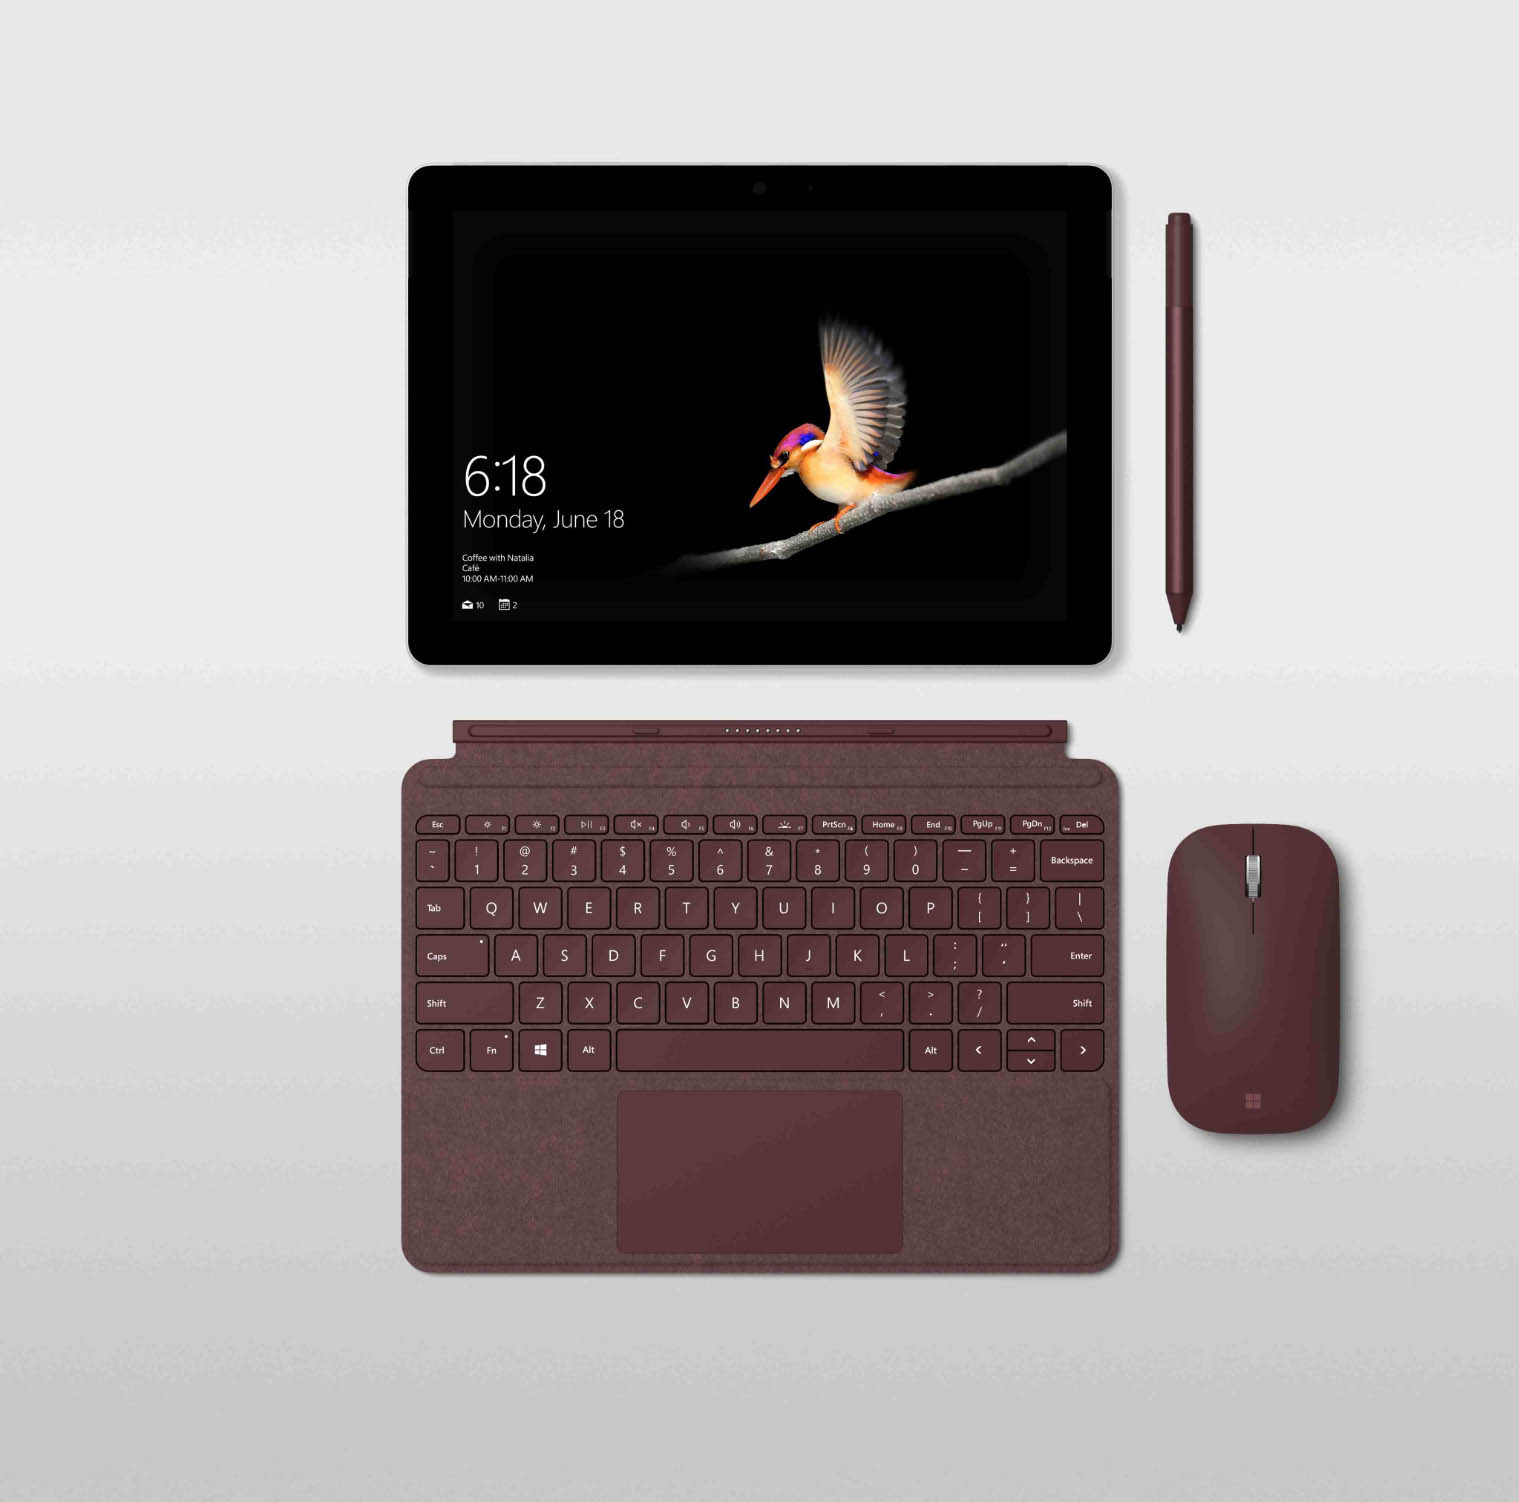 surface go with inking pen, mouse and keyboard